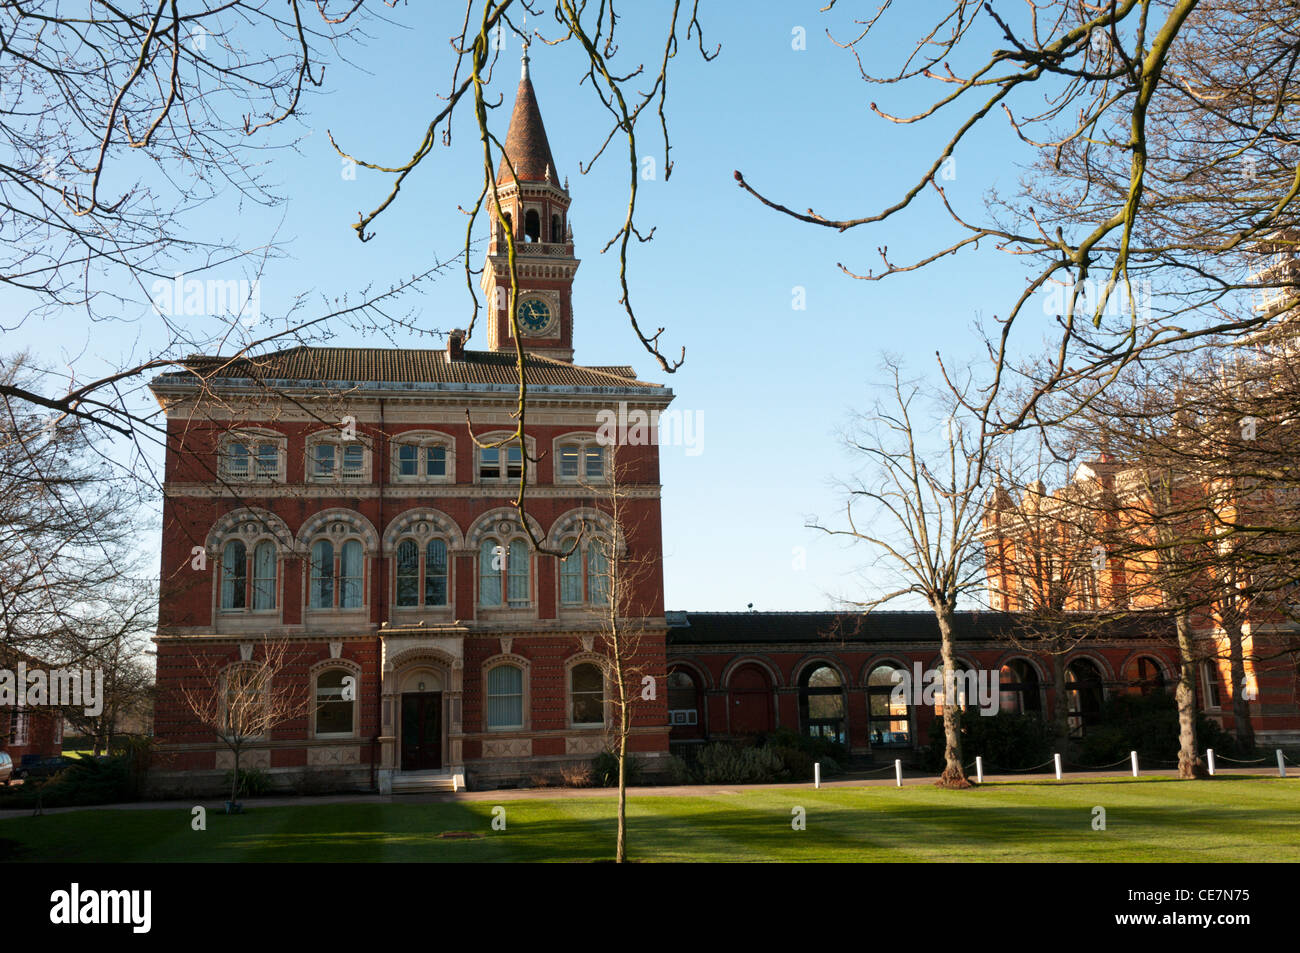 The 19th century New Buildings of Dulwich College in South London. Stock Photo